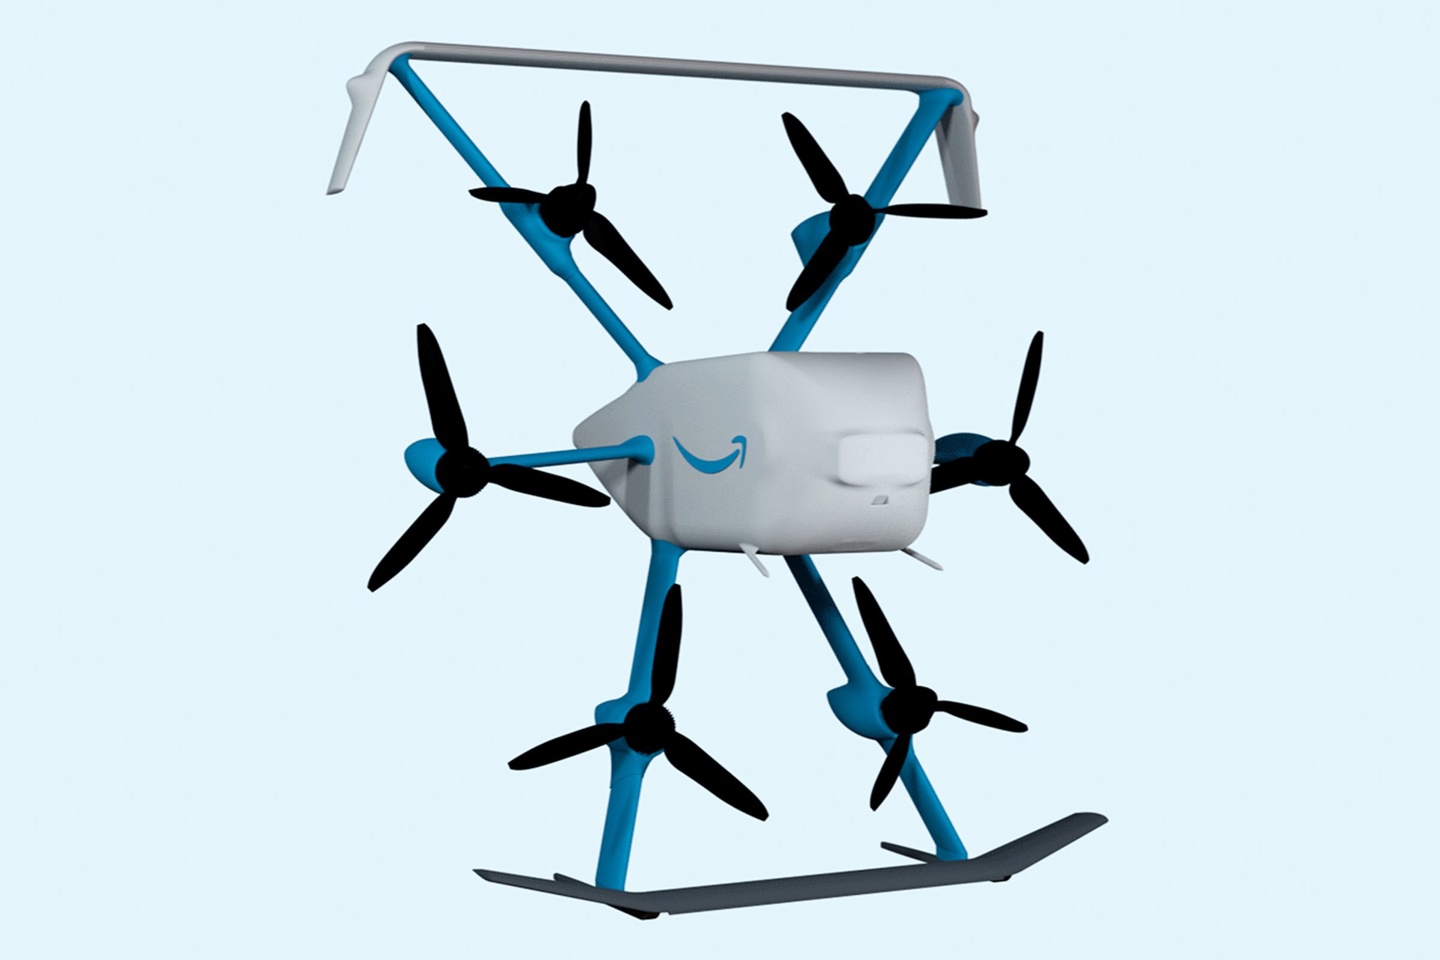 Amazon’s MK30 drone has six propellers in a hexagonal arrangement, with wings attached to the top and bottom arm pairs, and is colored blue and white. The middle is bulbous and teardrop shaped and has the amazon smile logo on it.